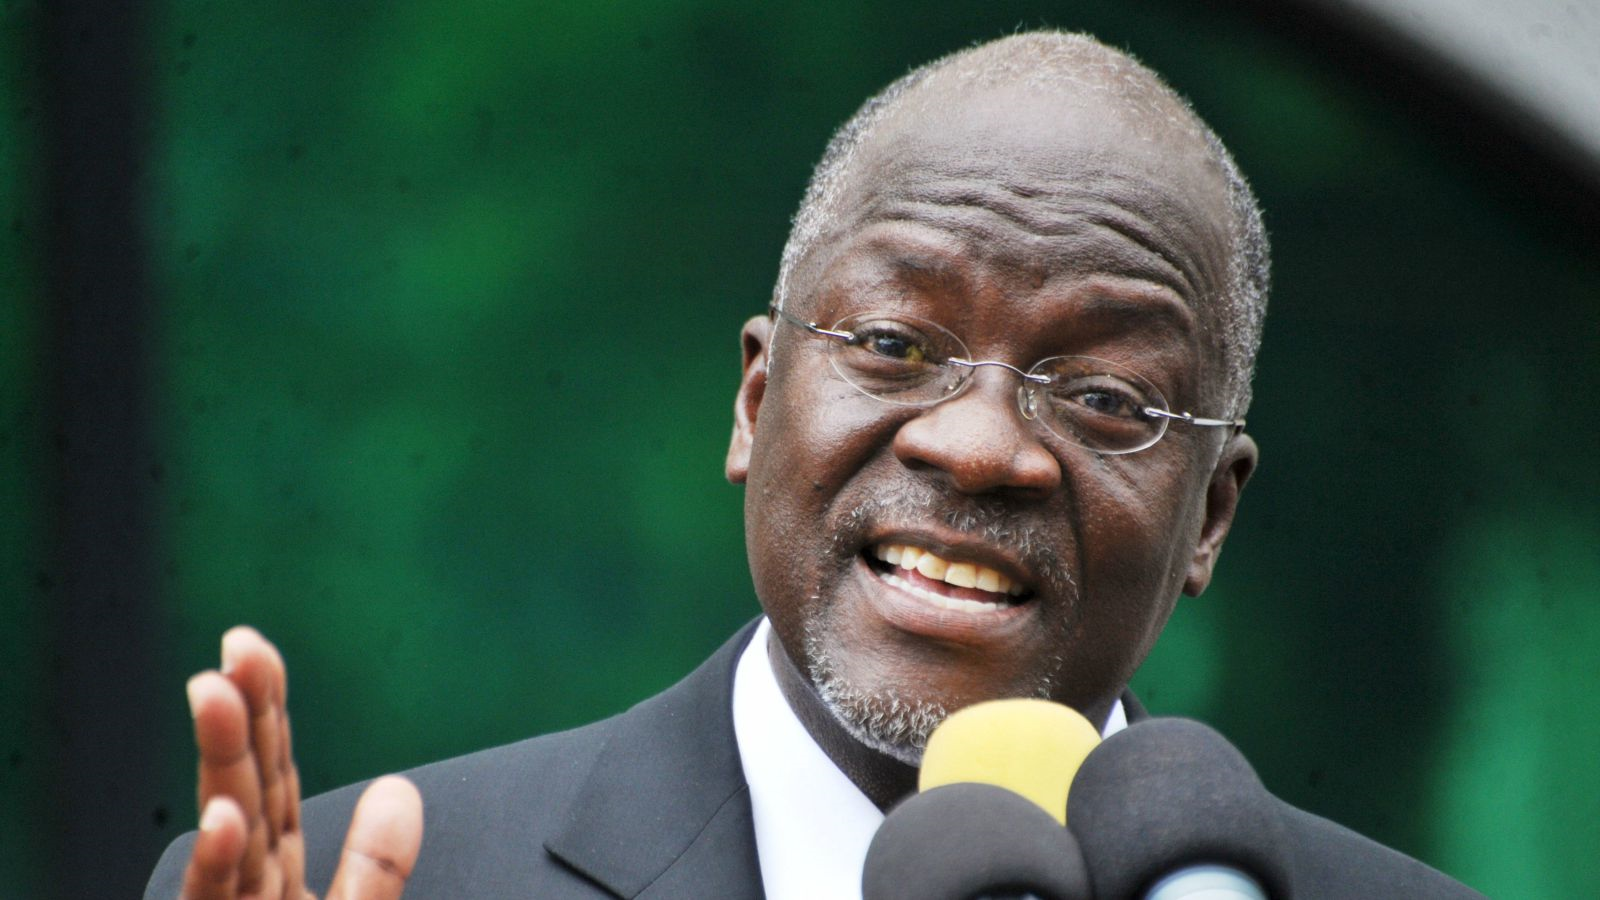 Magufuli was sworn in November, and has made addressing corruption and government inefficiency a cornerstone of his administration. After he assumed office, he made his intentions clear in his first speech to parliament.